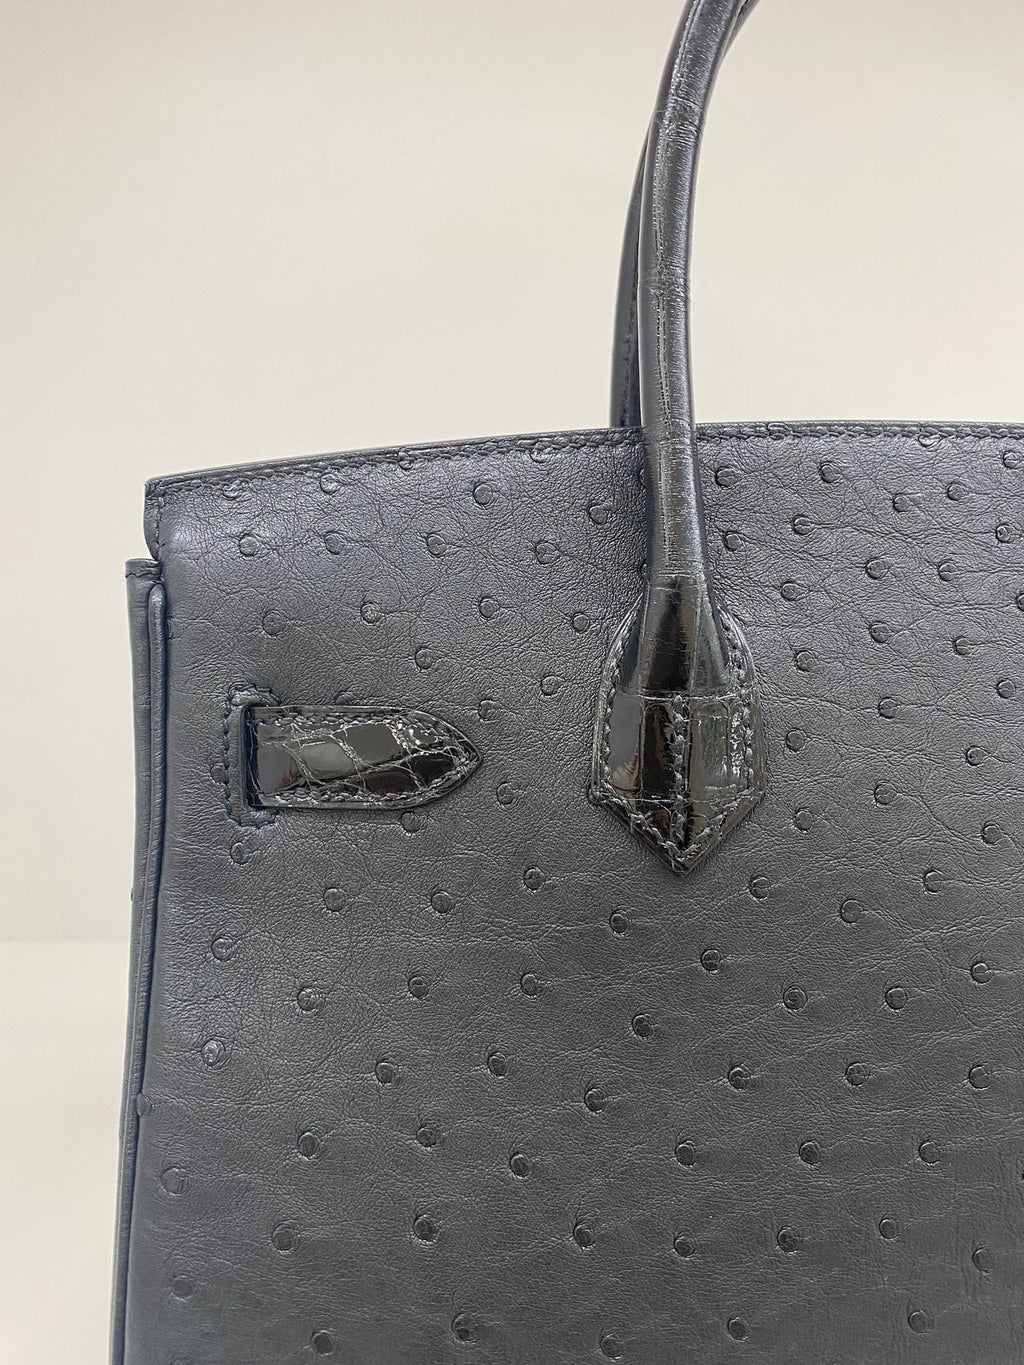 Hermes Bicolor Alligator and Ostrich Birkin Touch 30 Bag – The Closet